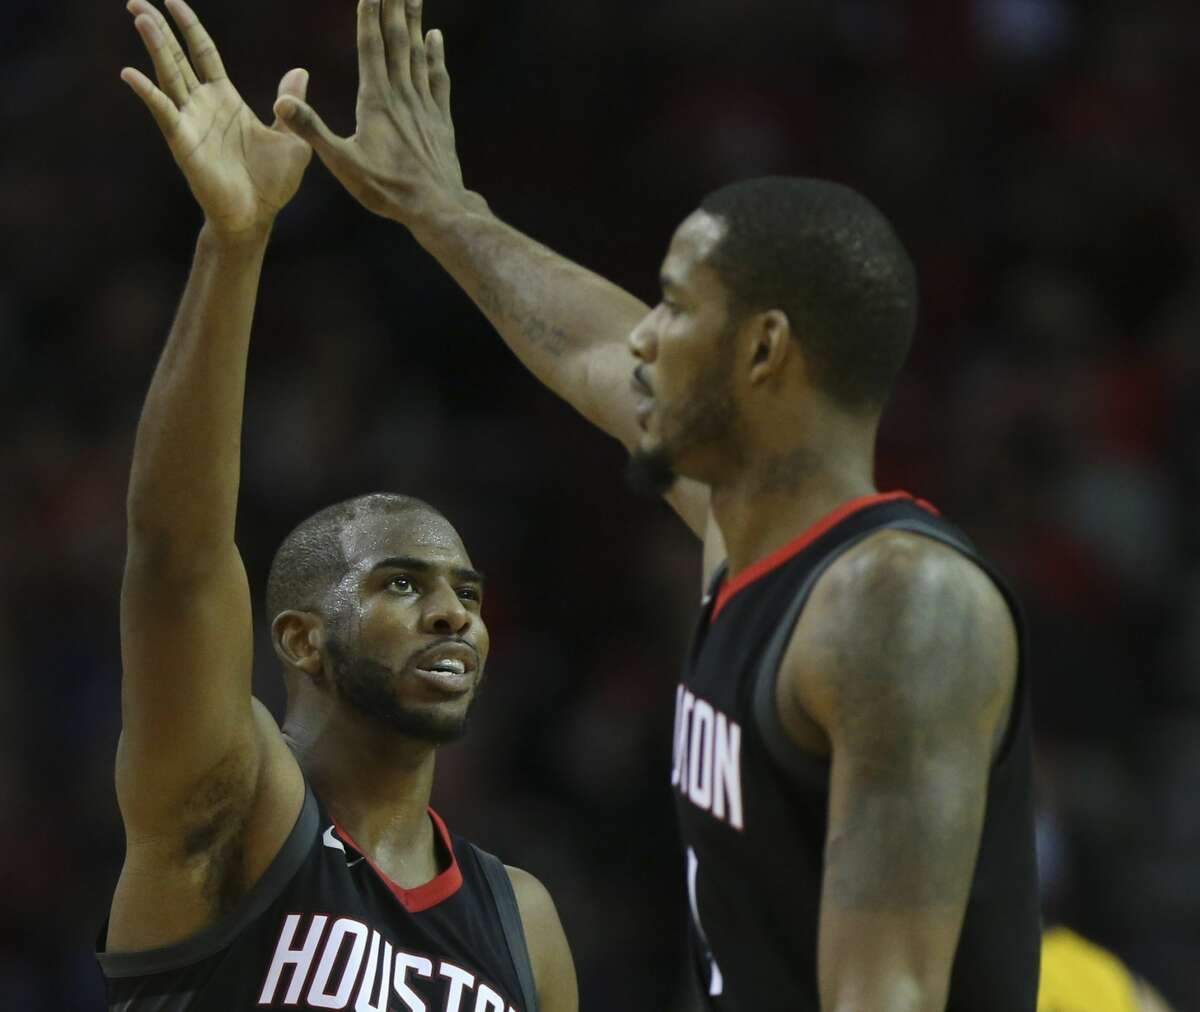 Houston Rockets guard Chris Paul (3) and forward Trevor Ariza (1) high-five each other during the fourth quarter of a NBA game against the Indiana Pacers at Toyota Center on Wednesday, Nov. 29, 2017, in Houston. The Houston Rockets defeated the Indiana Pacers 118-97. ( Yi-Chin Lee / Houston Chronicle )